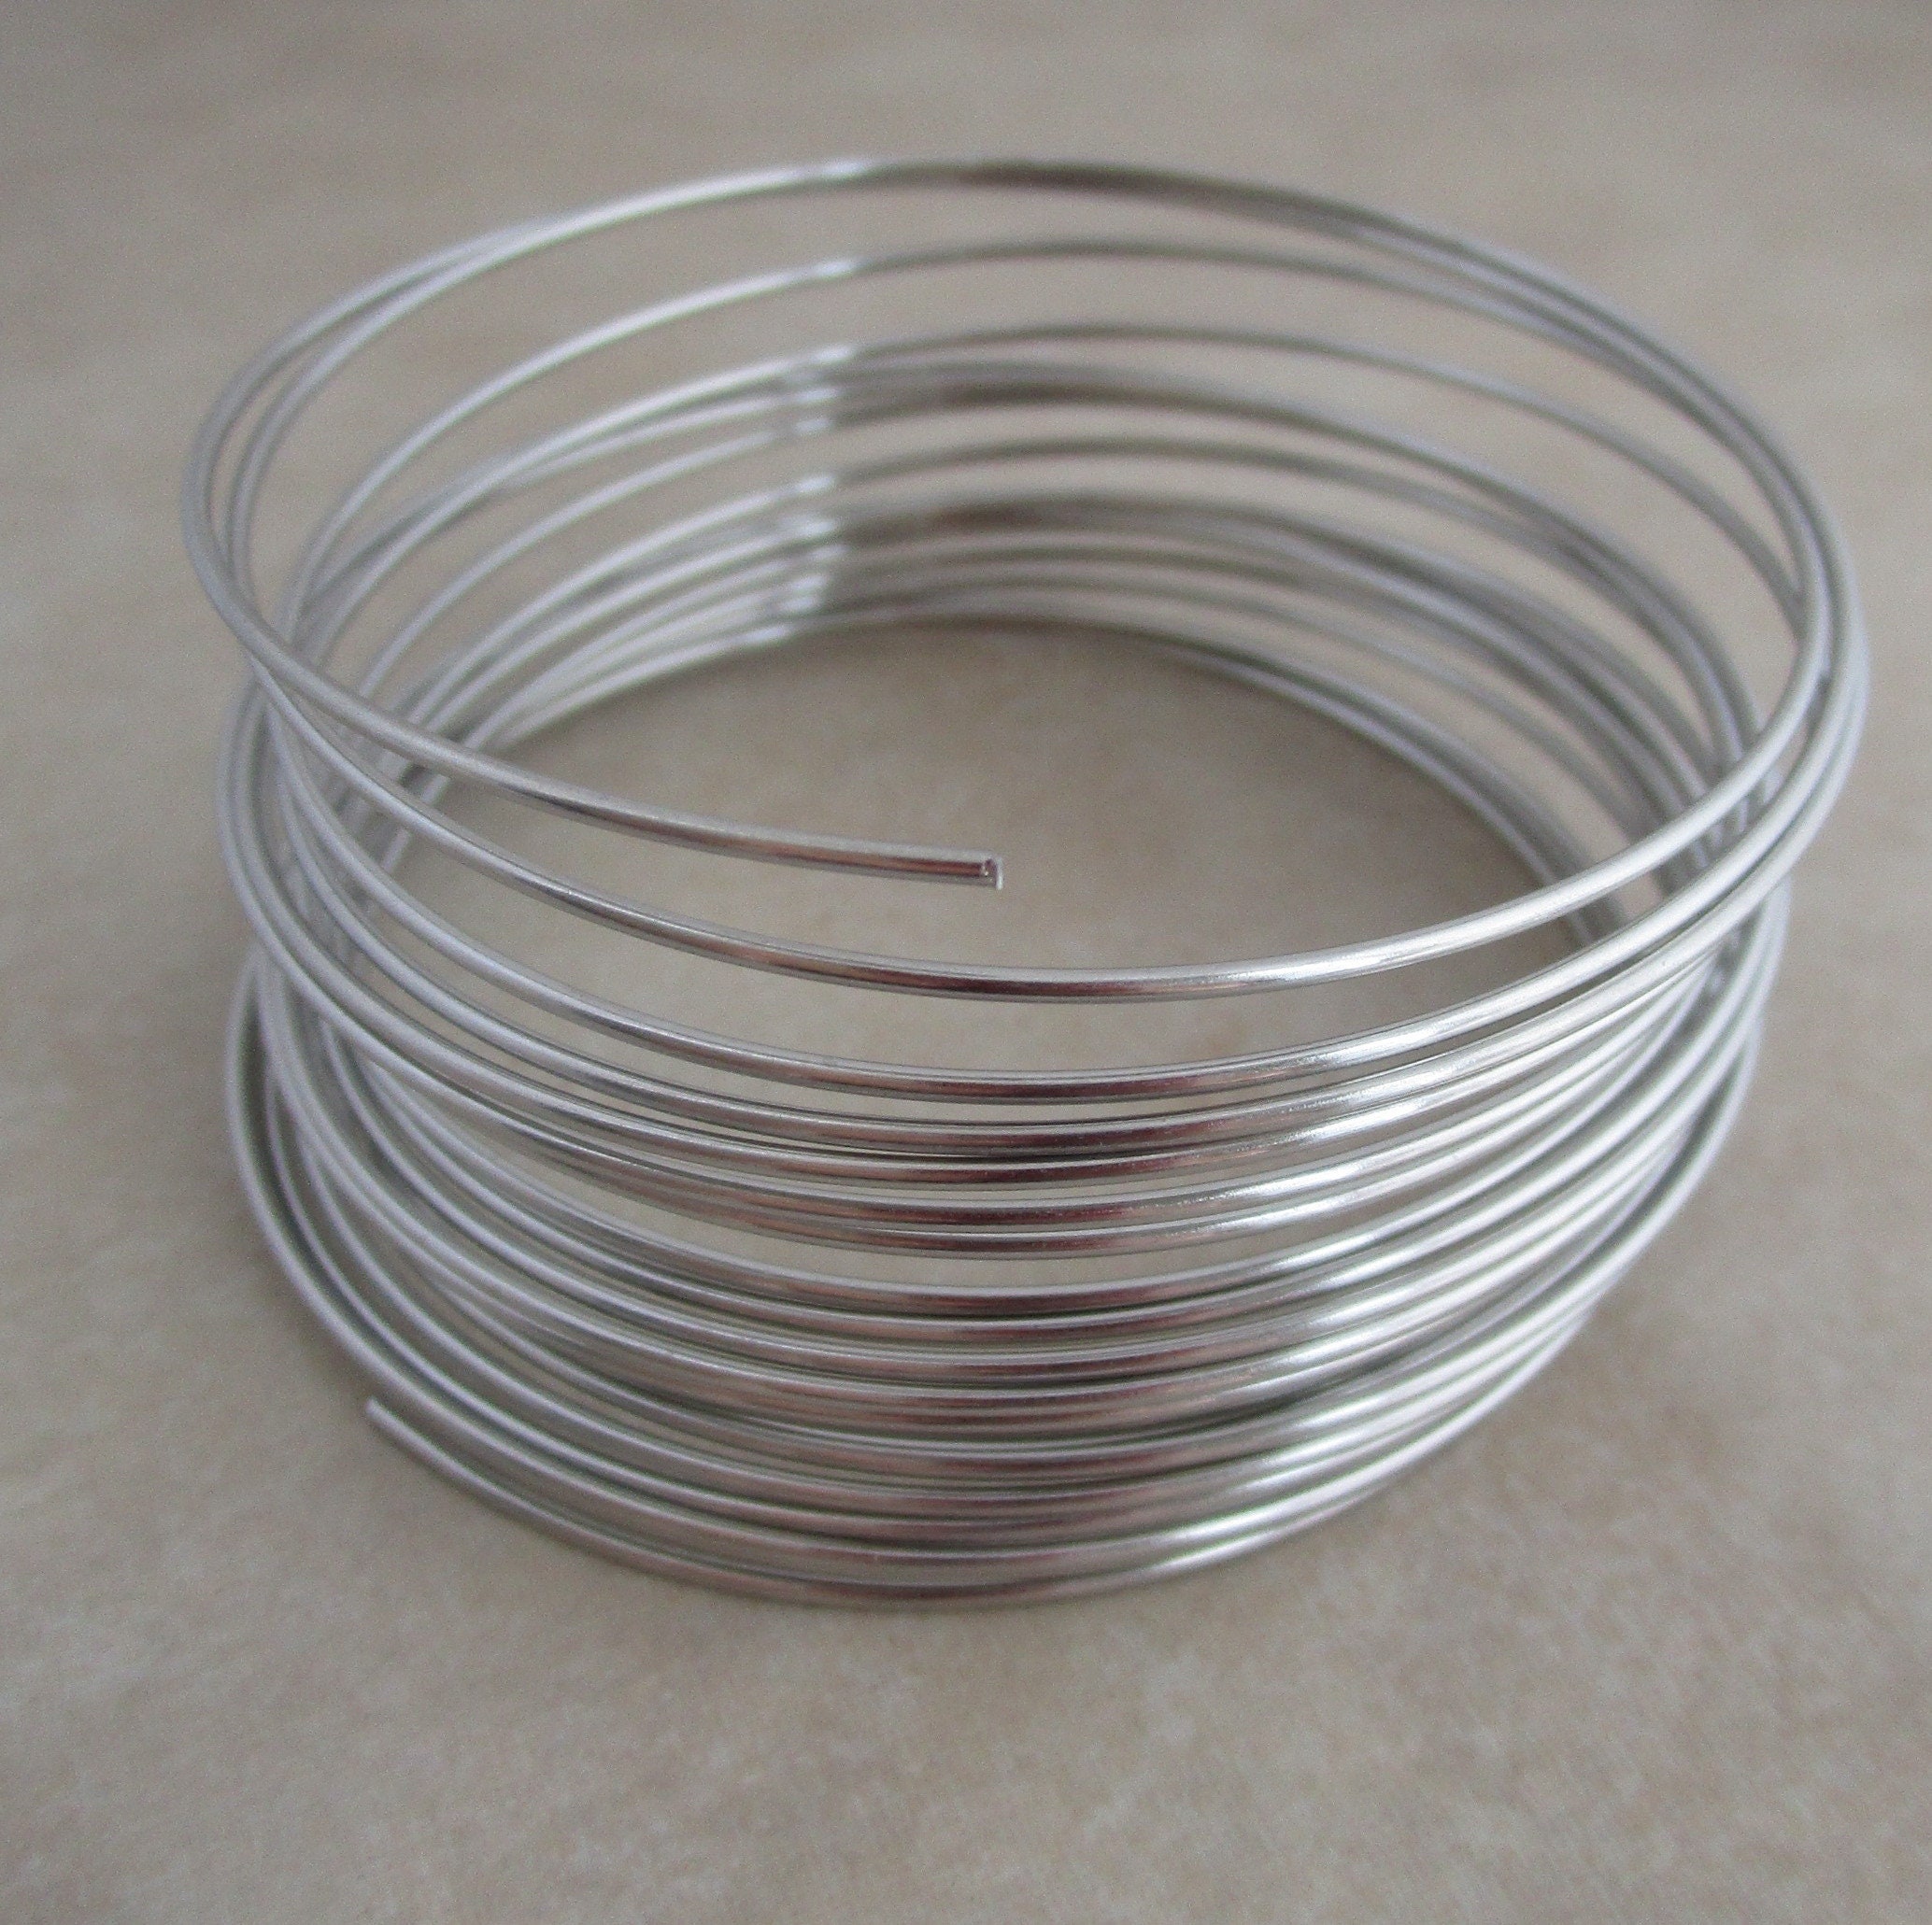  INSPIRELLE 20 Gauge 550 Feet KC Gold Aluminum Craft Wire  Bendable Metal Wire for Jewelry Craft Making